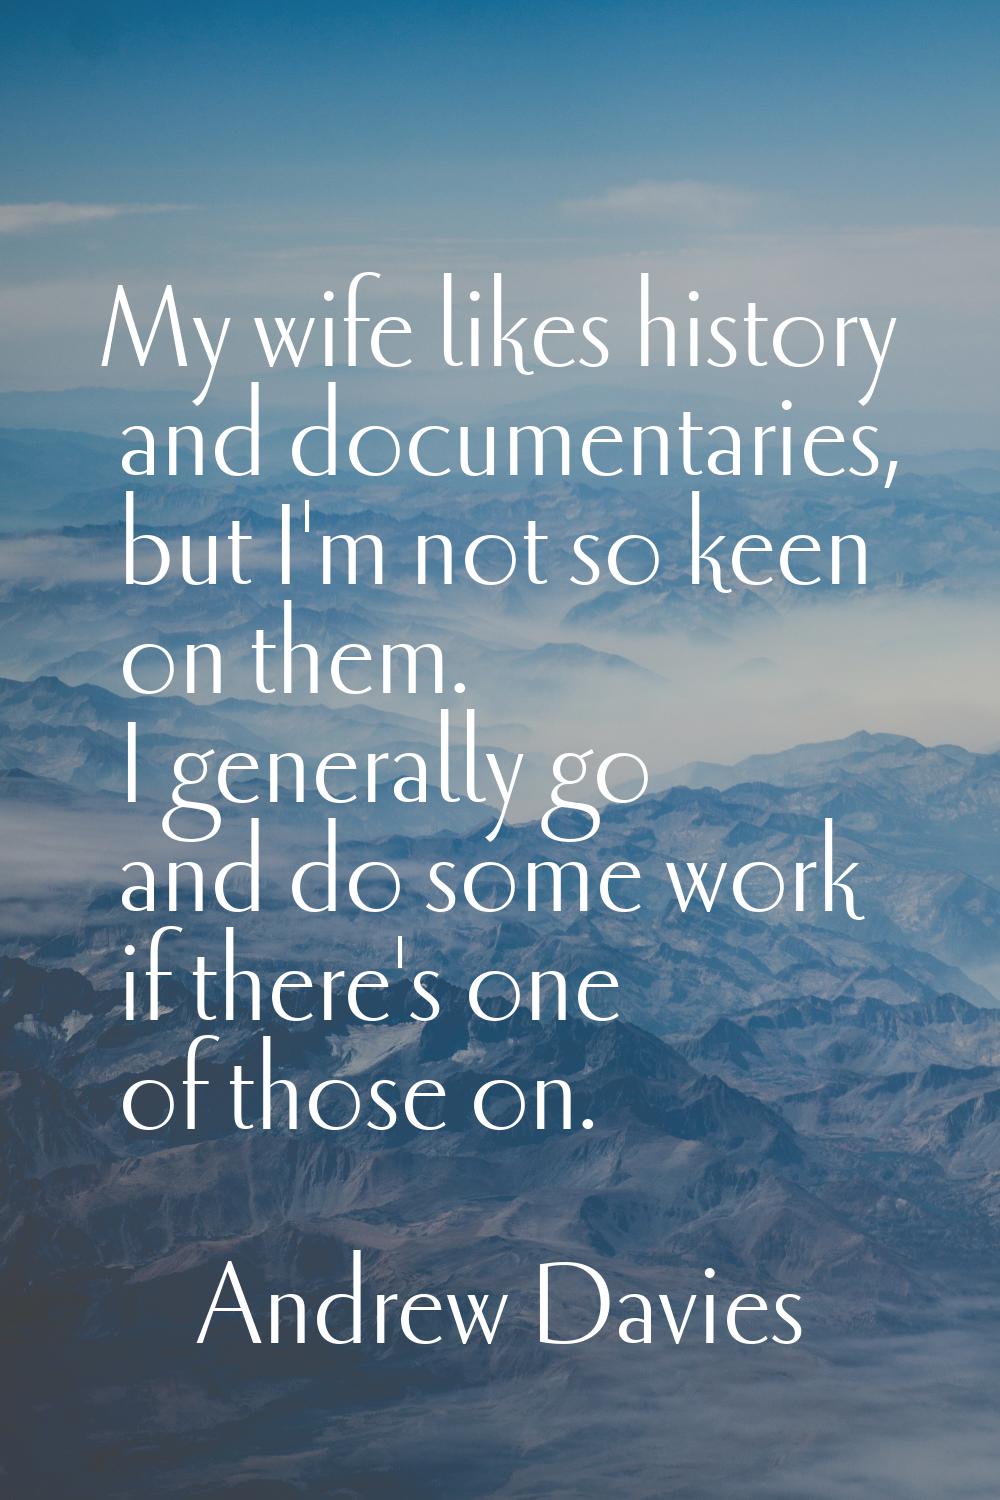 My wife likes history and documentaries, but I'm not so keen on them. I generally go and do some wo